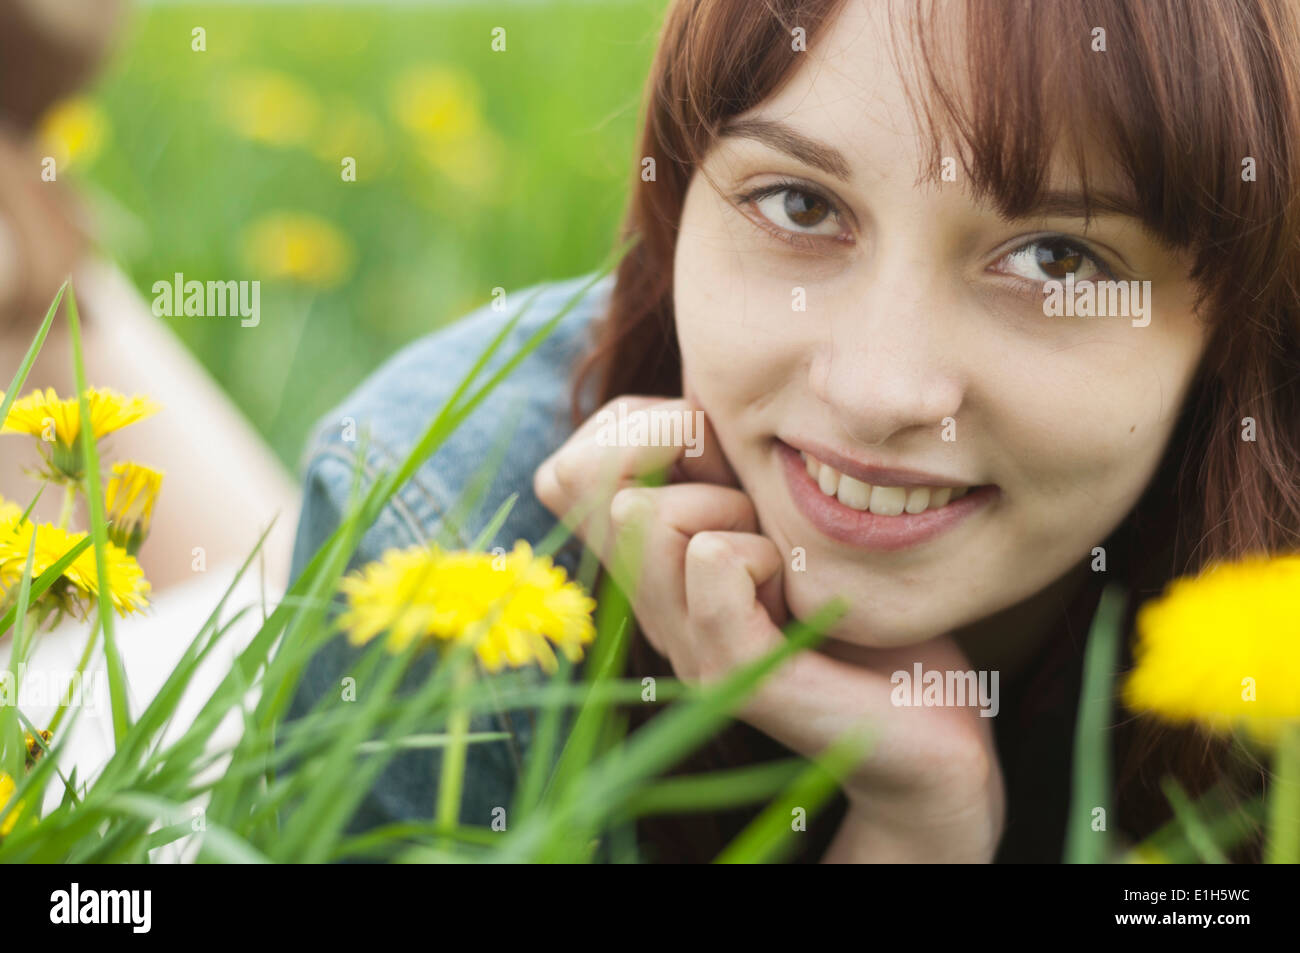 Close up portrait of young woman with dandelions Stock Photo